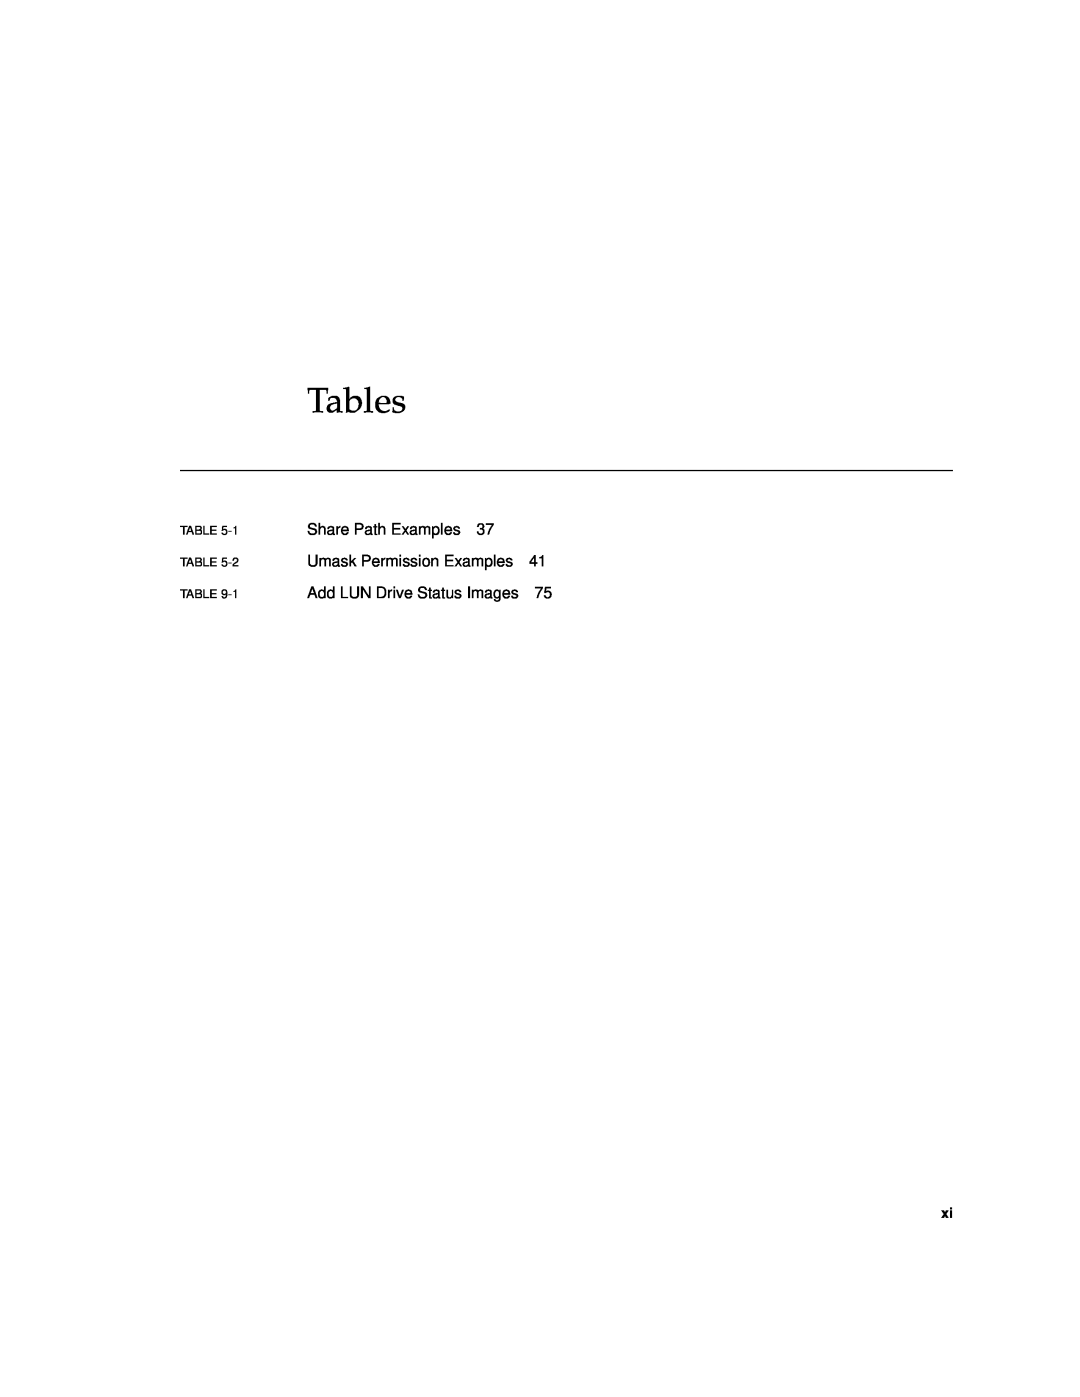 Sun Microsystems 5210 NAS manual Tables, Share Path Examples, Add LUN Drive Status Images 